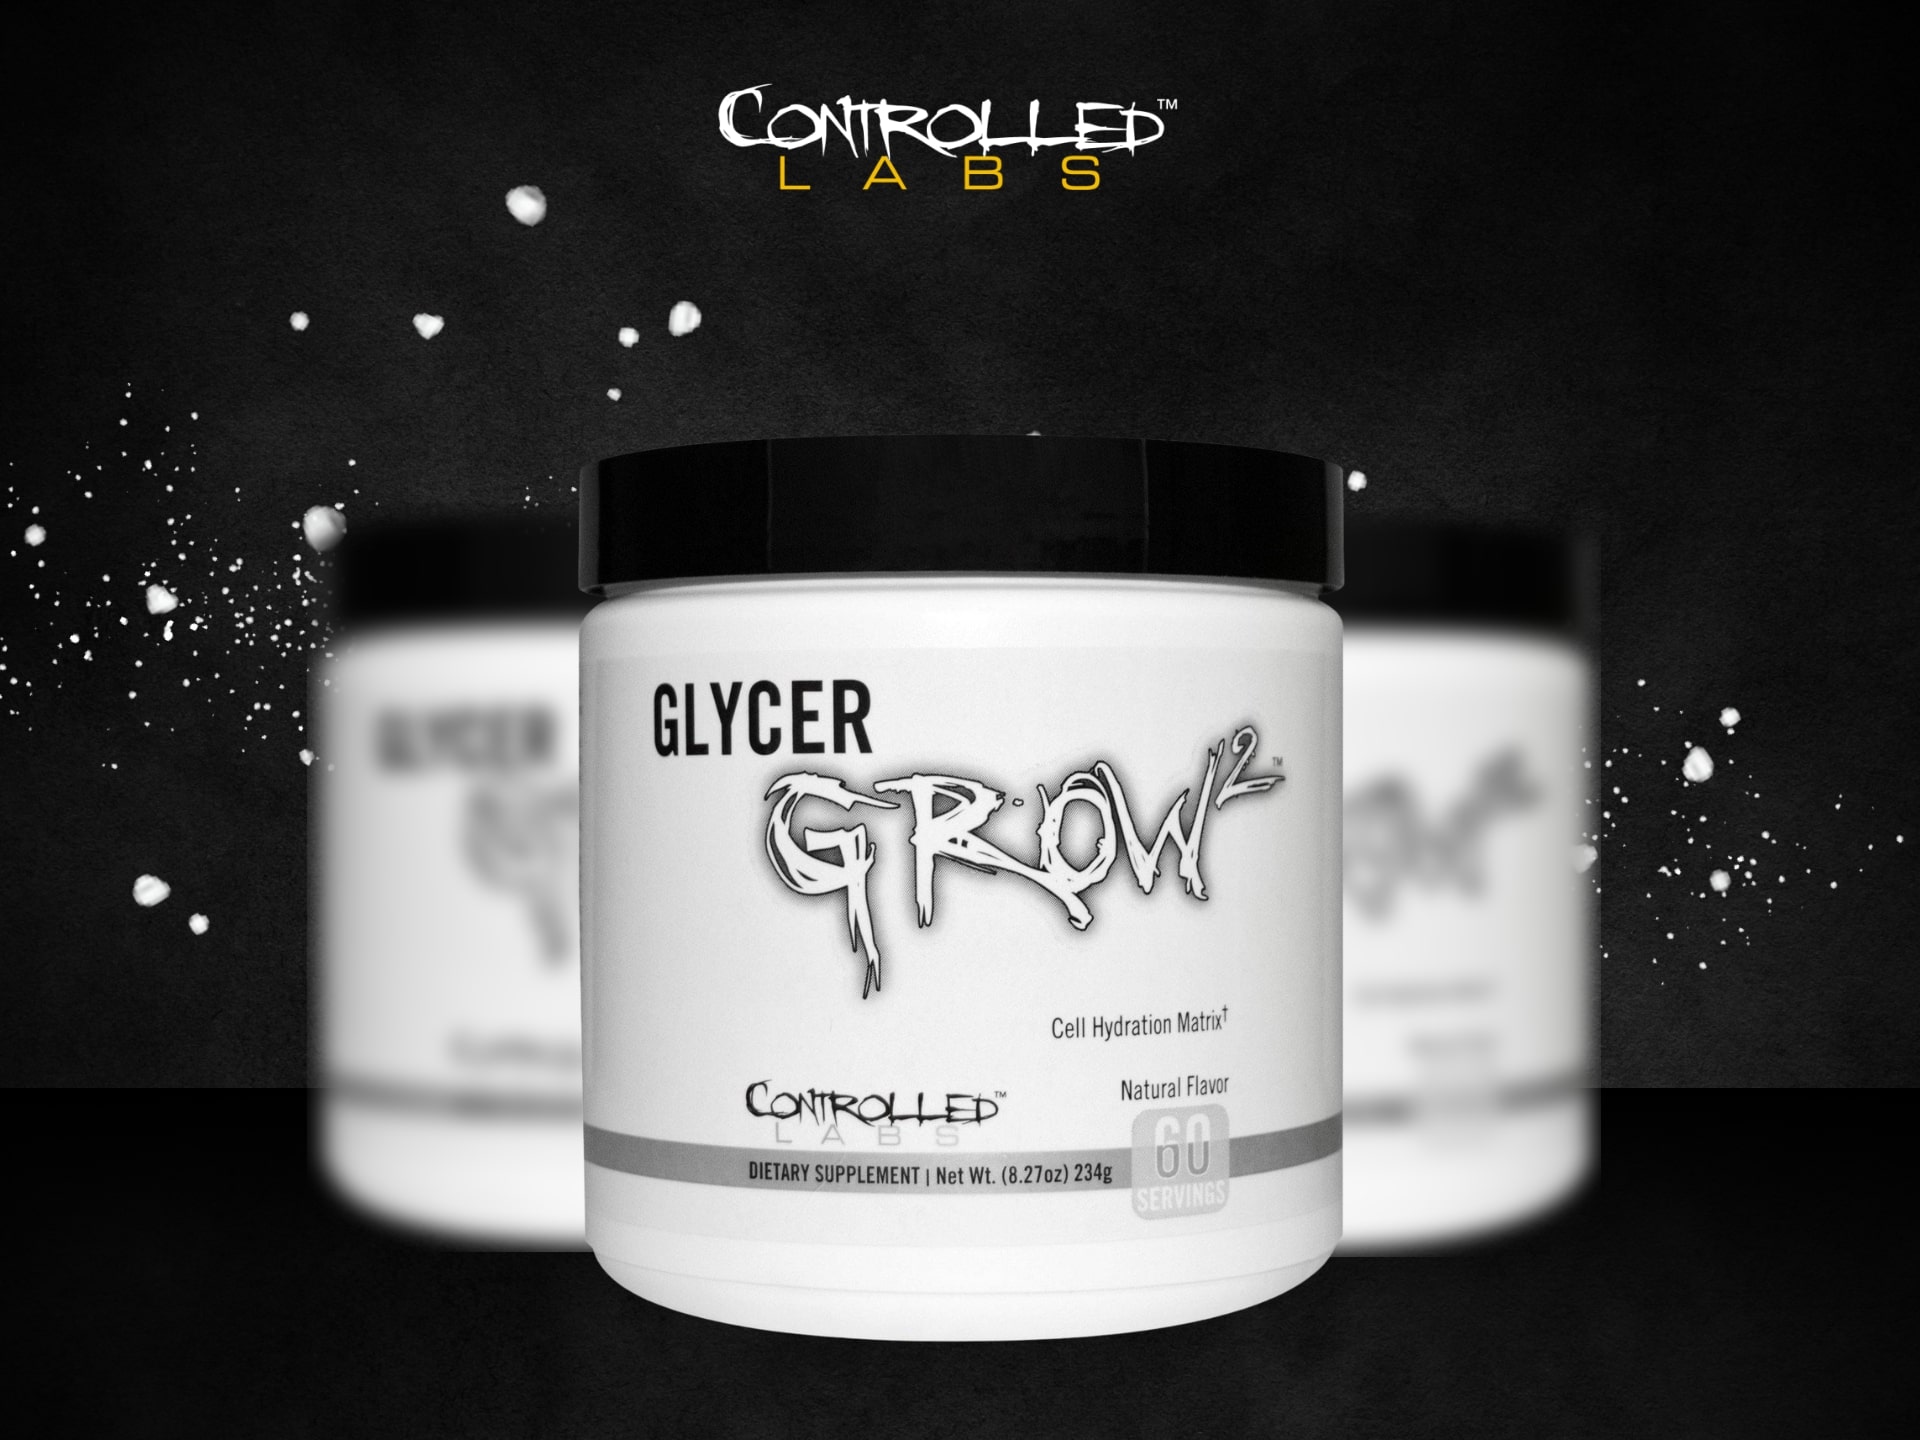 Controlled Labs Glycer Grow2